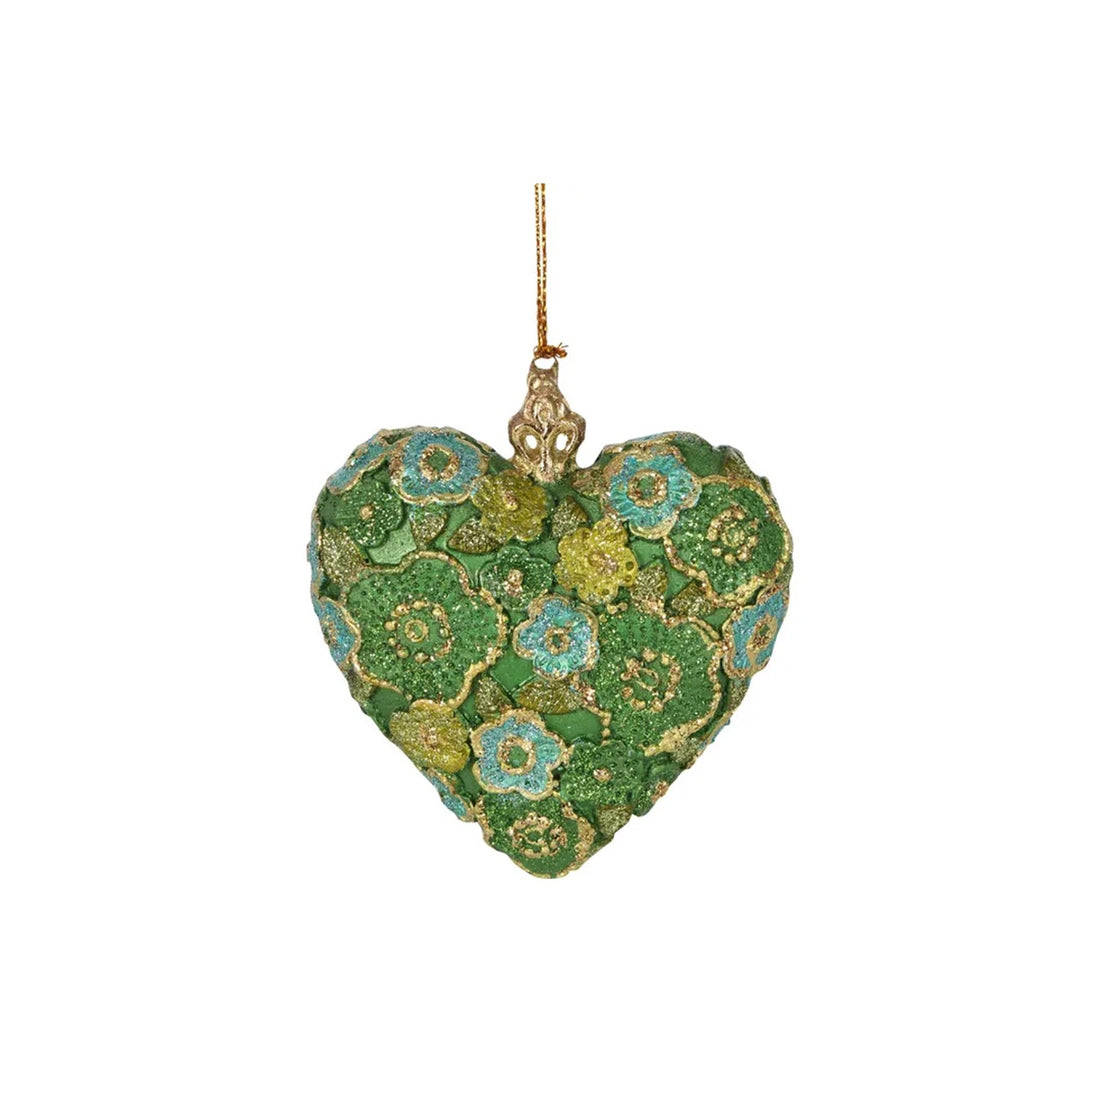 Floral Heart Hanging Ornament - Green